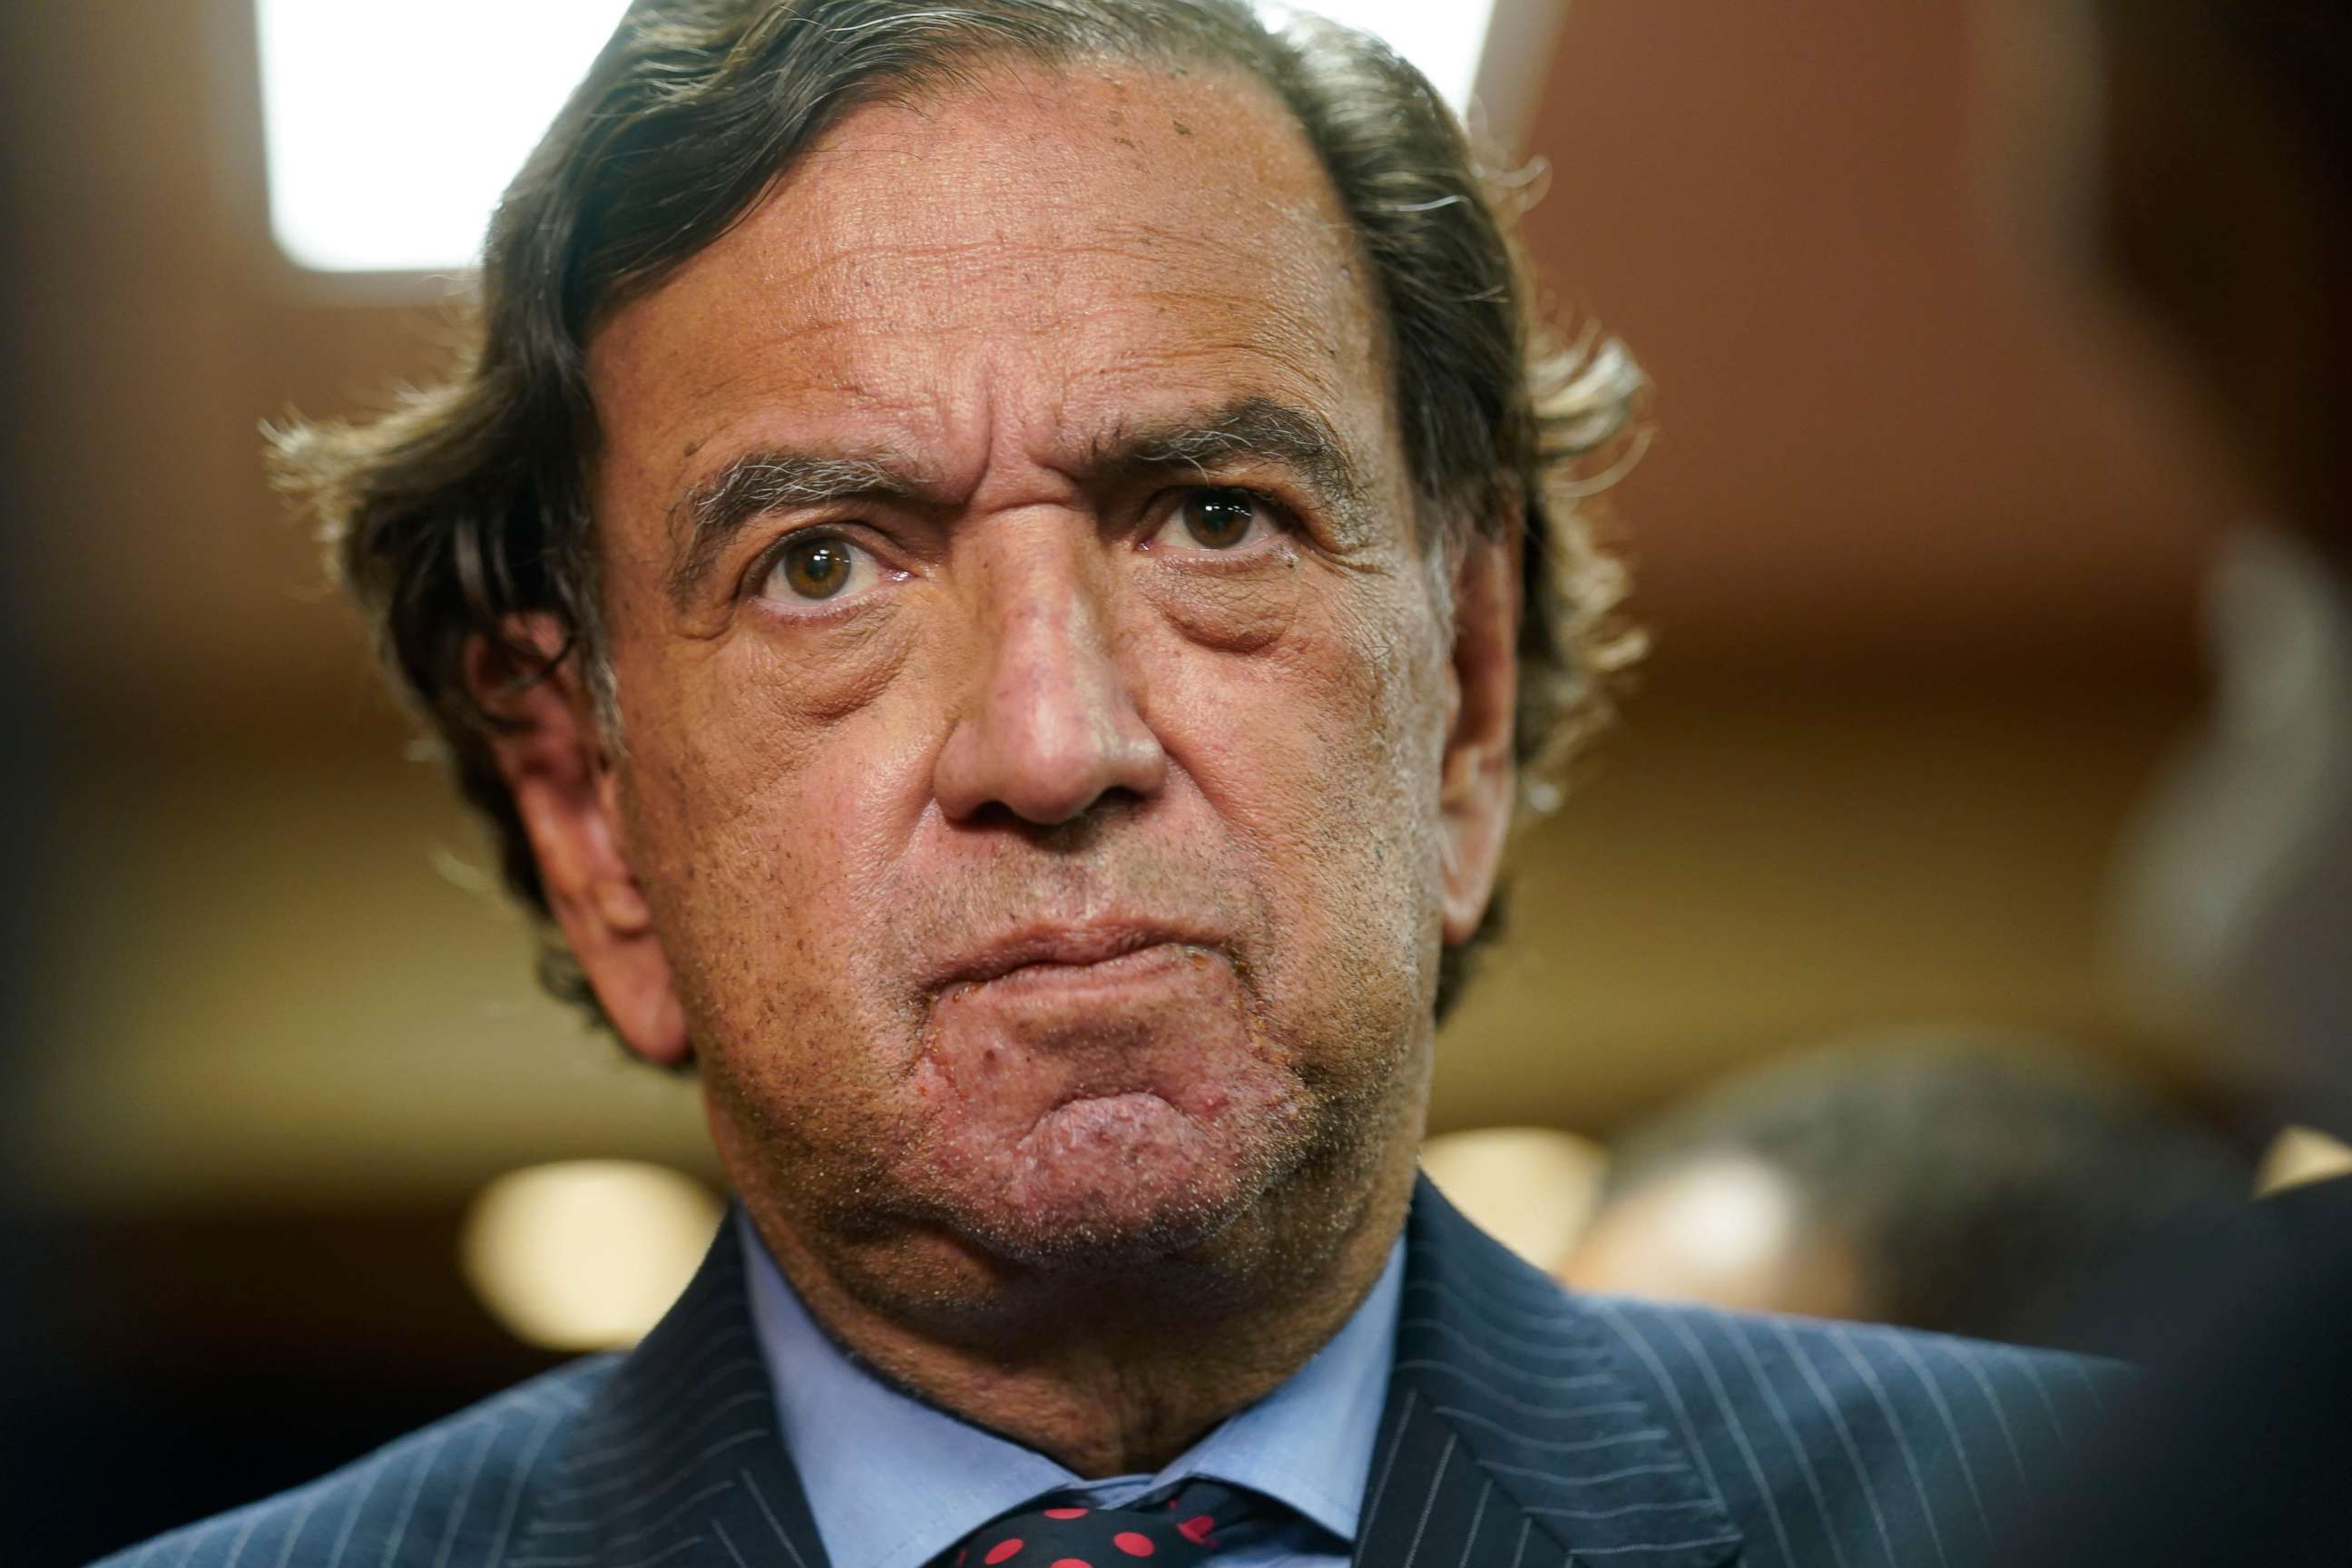 PHOTO: Former U.S. diplomat Bill Richardson speaks to reporters after a news conference in New York, Nov. 16, 2021.